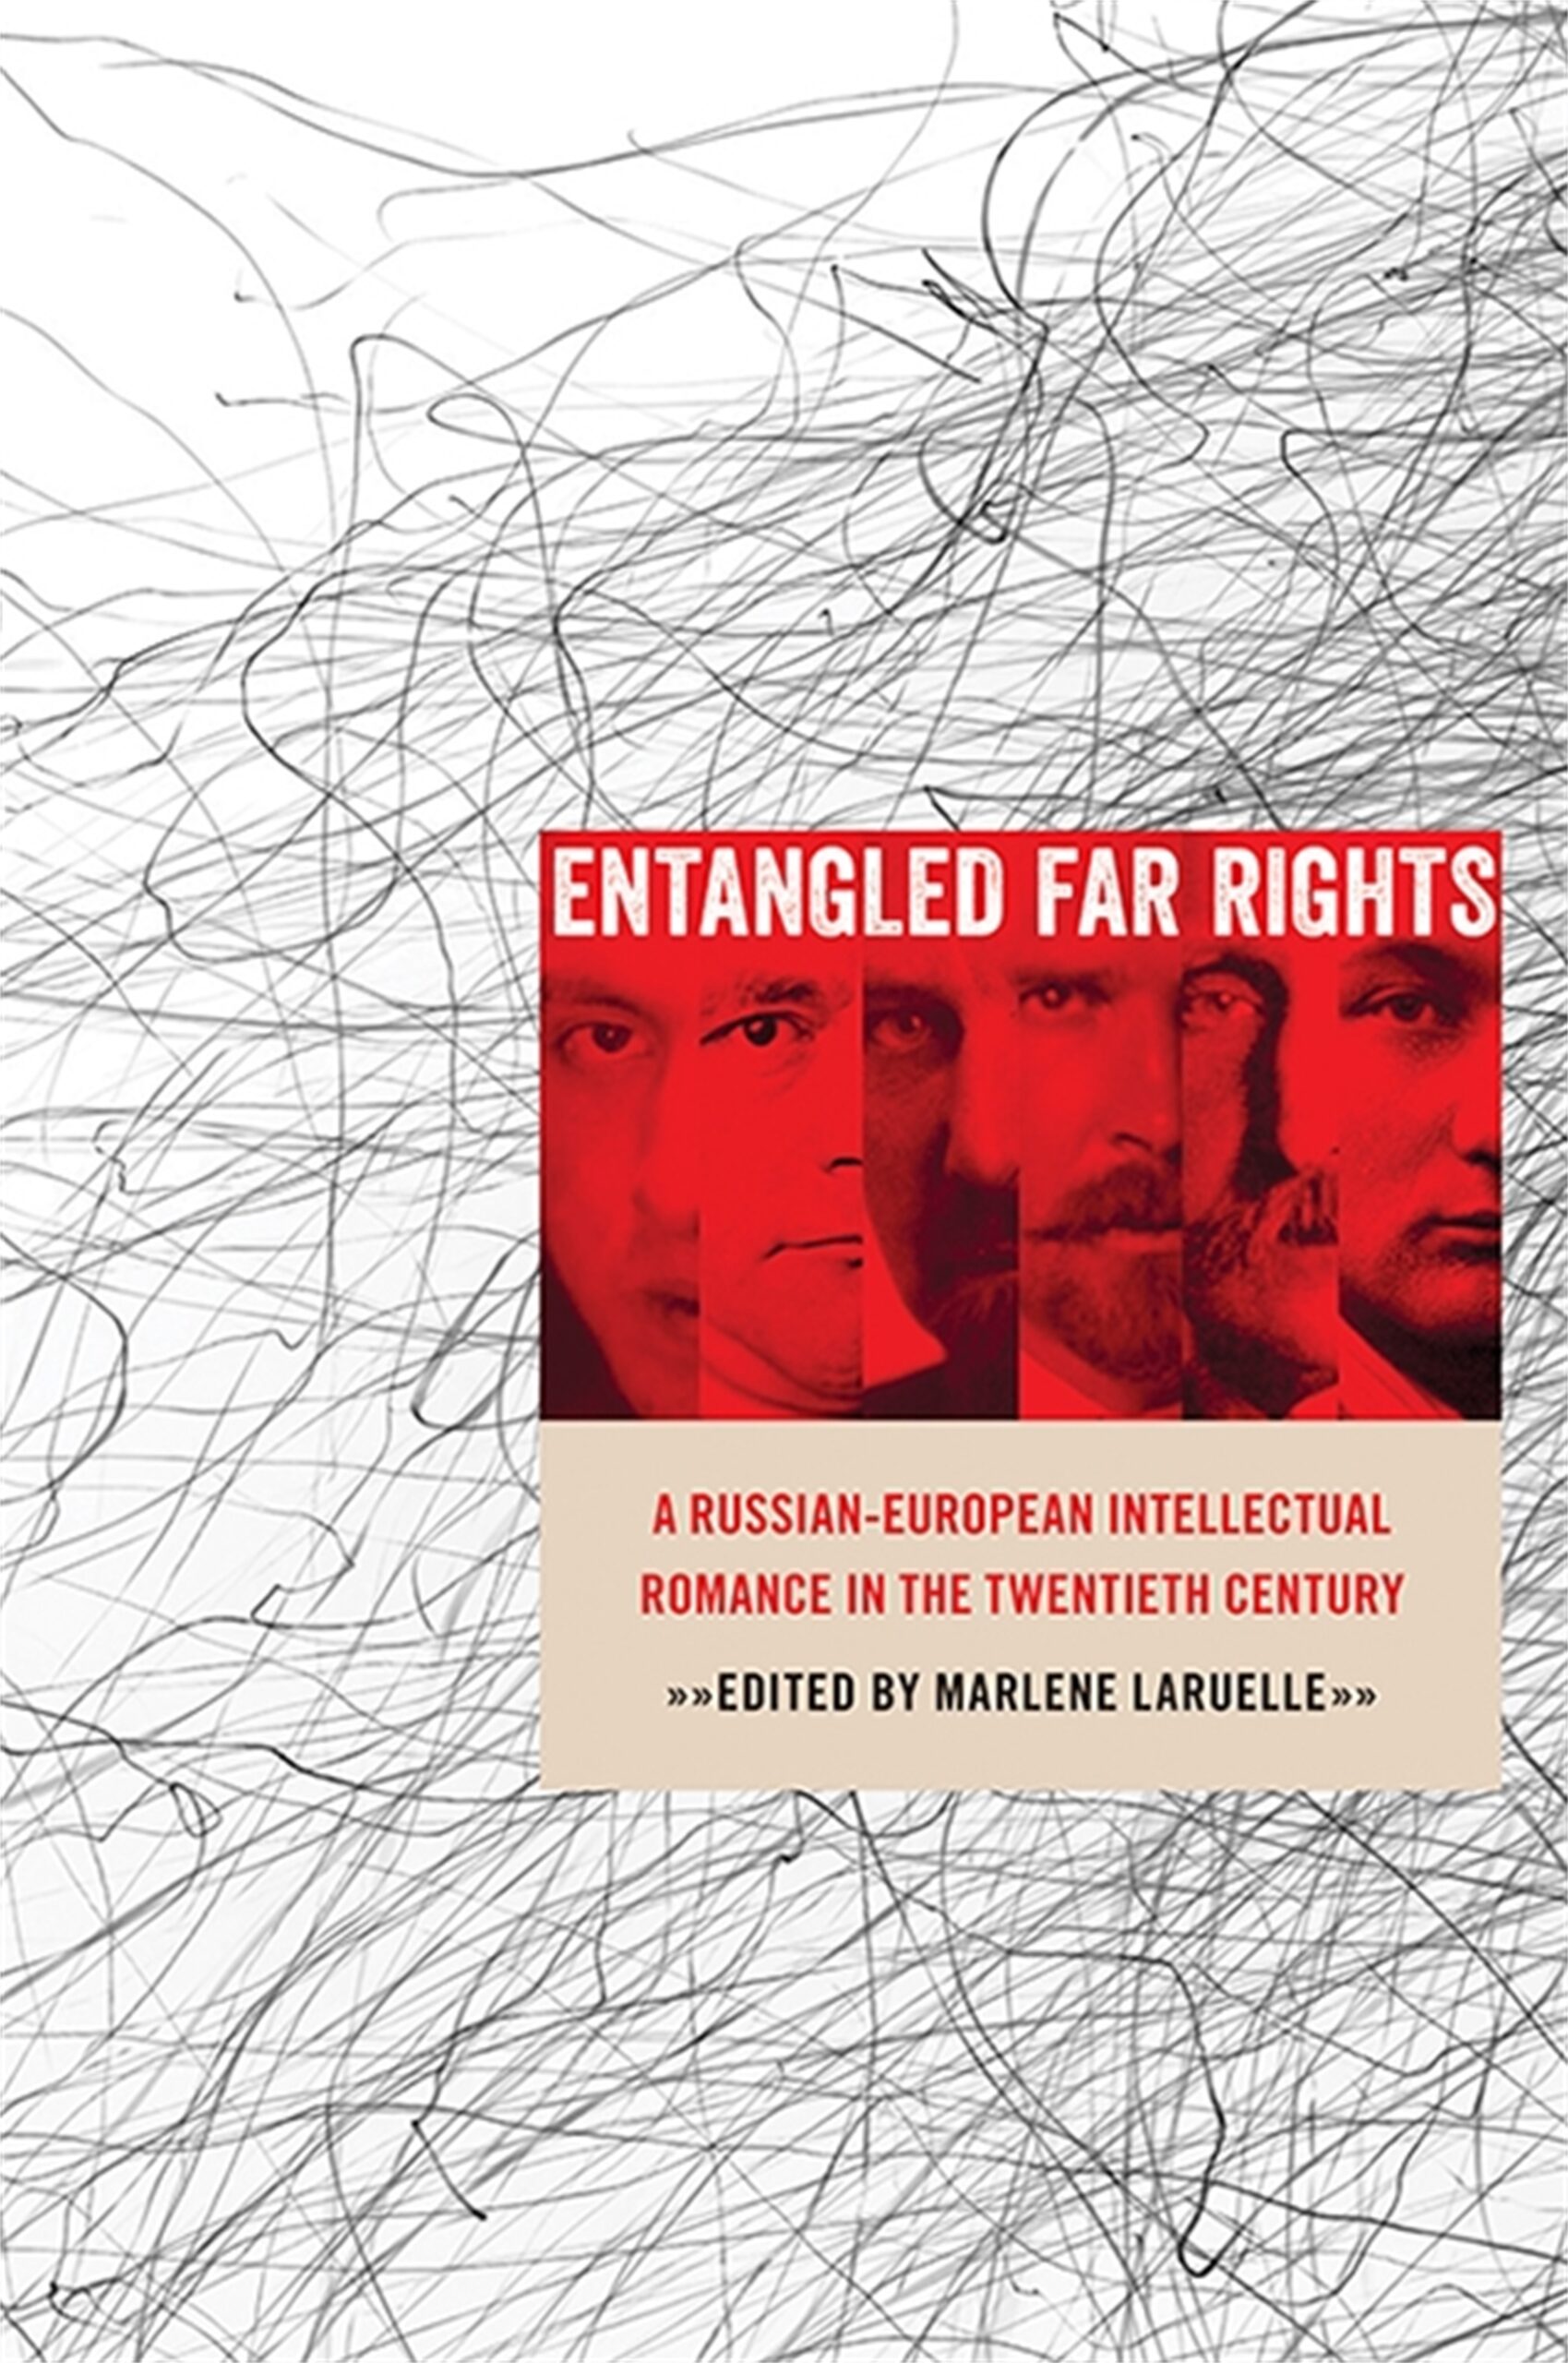 Entangled Far Rights: A Russian-European Intellectual Romance in the 20th Century